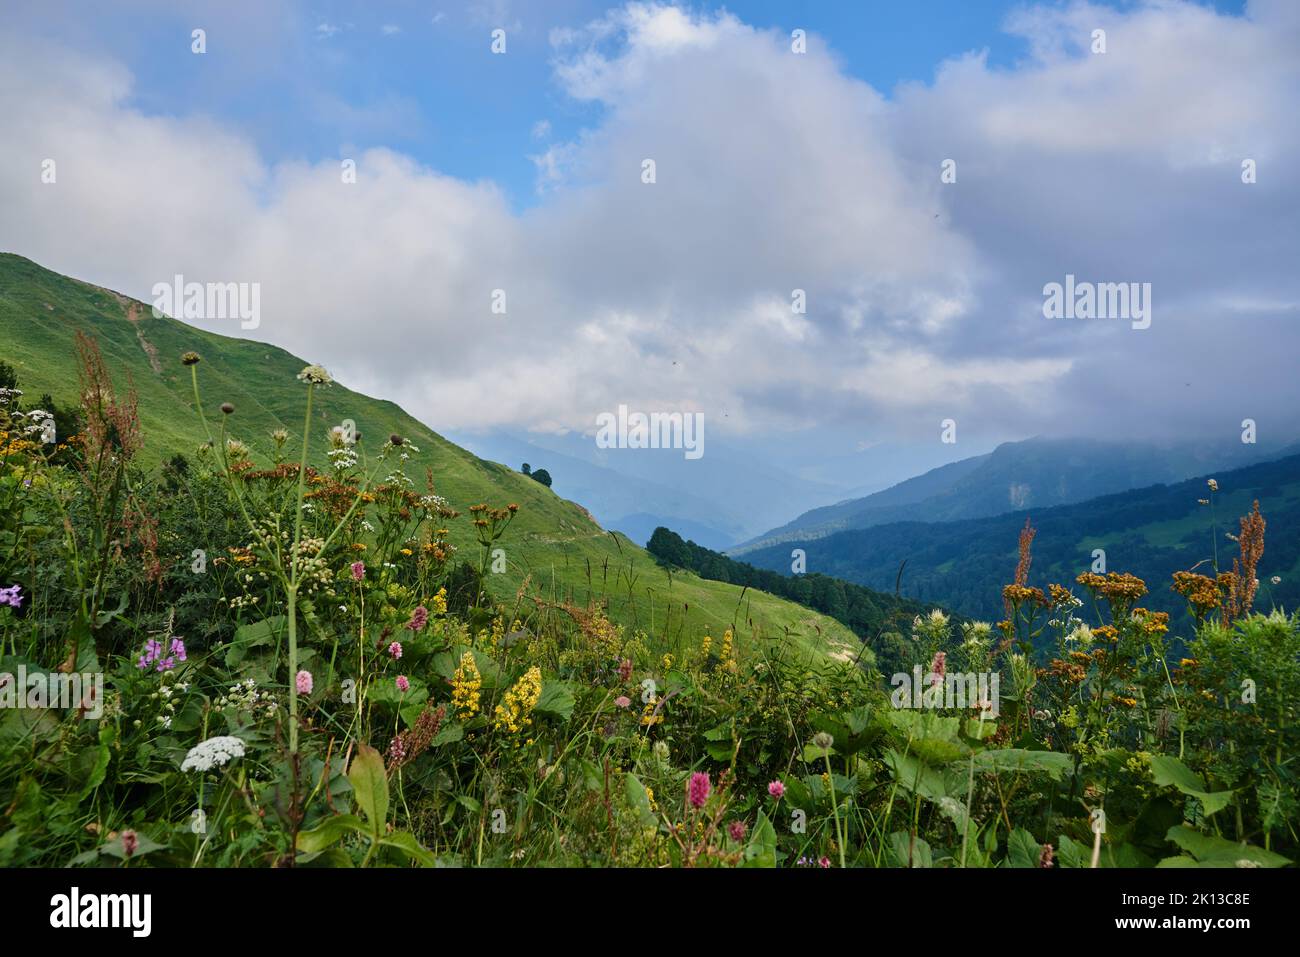 Green hills under a cloudy sky, bright flowers in the foreground. Summer mountain landscape. Stock Photo